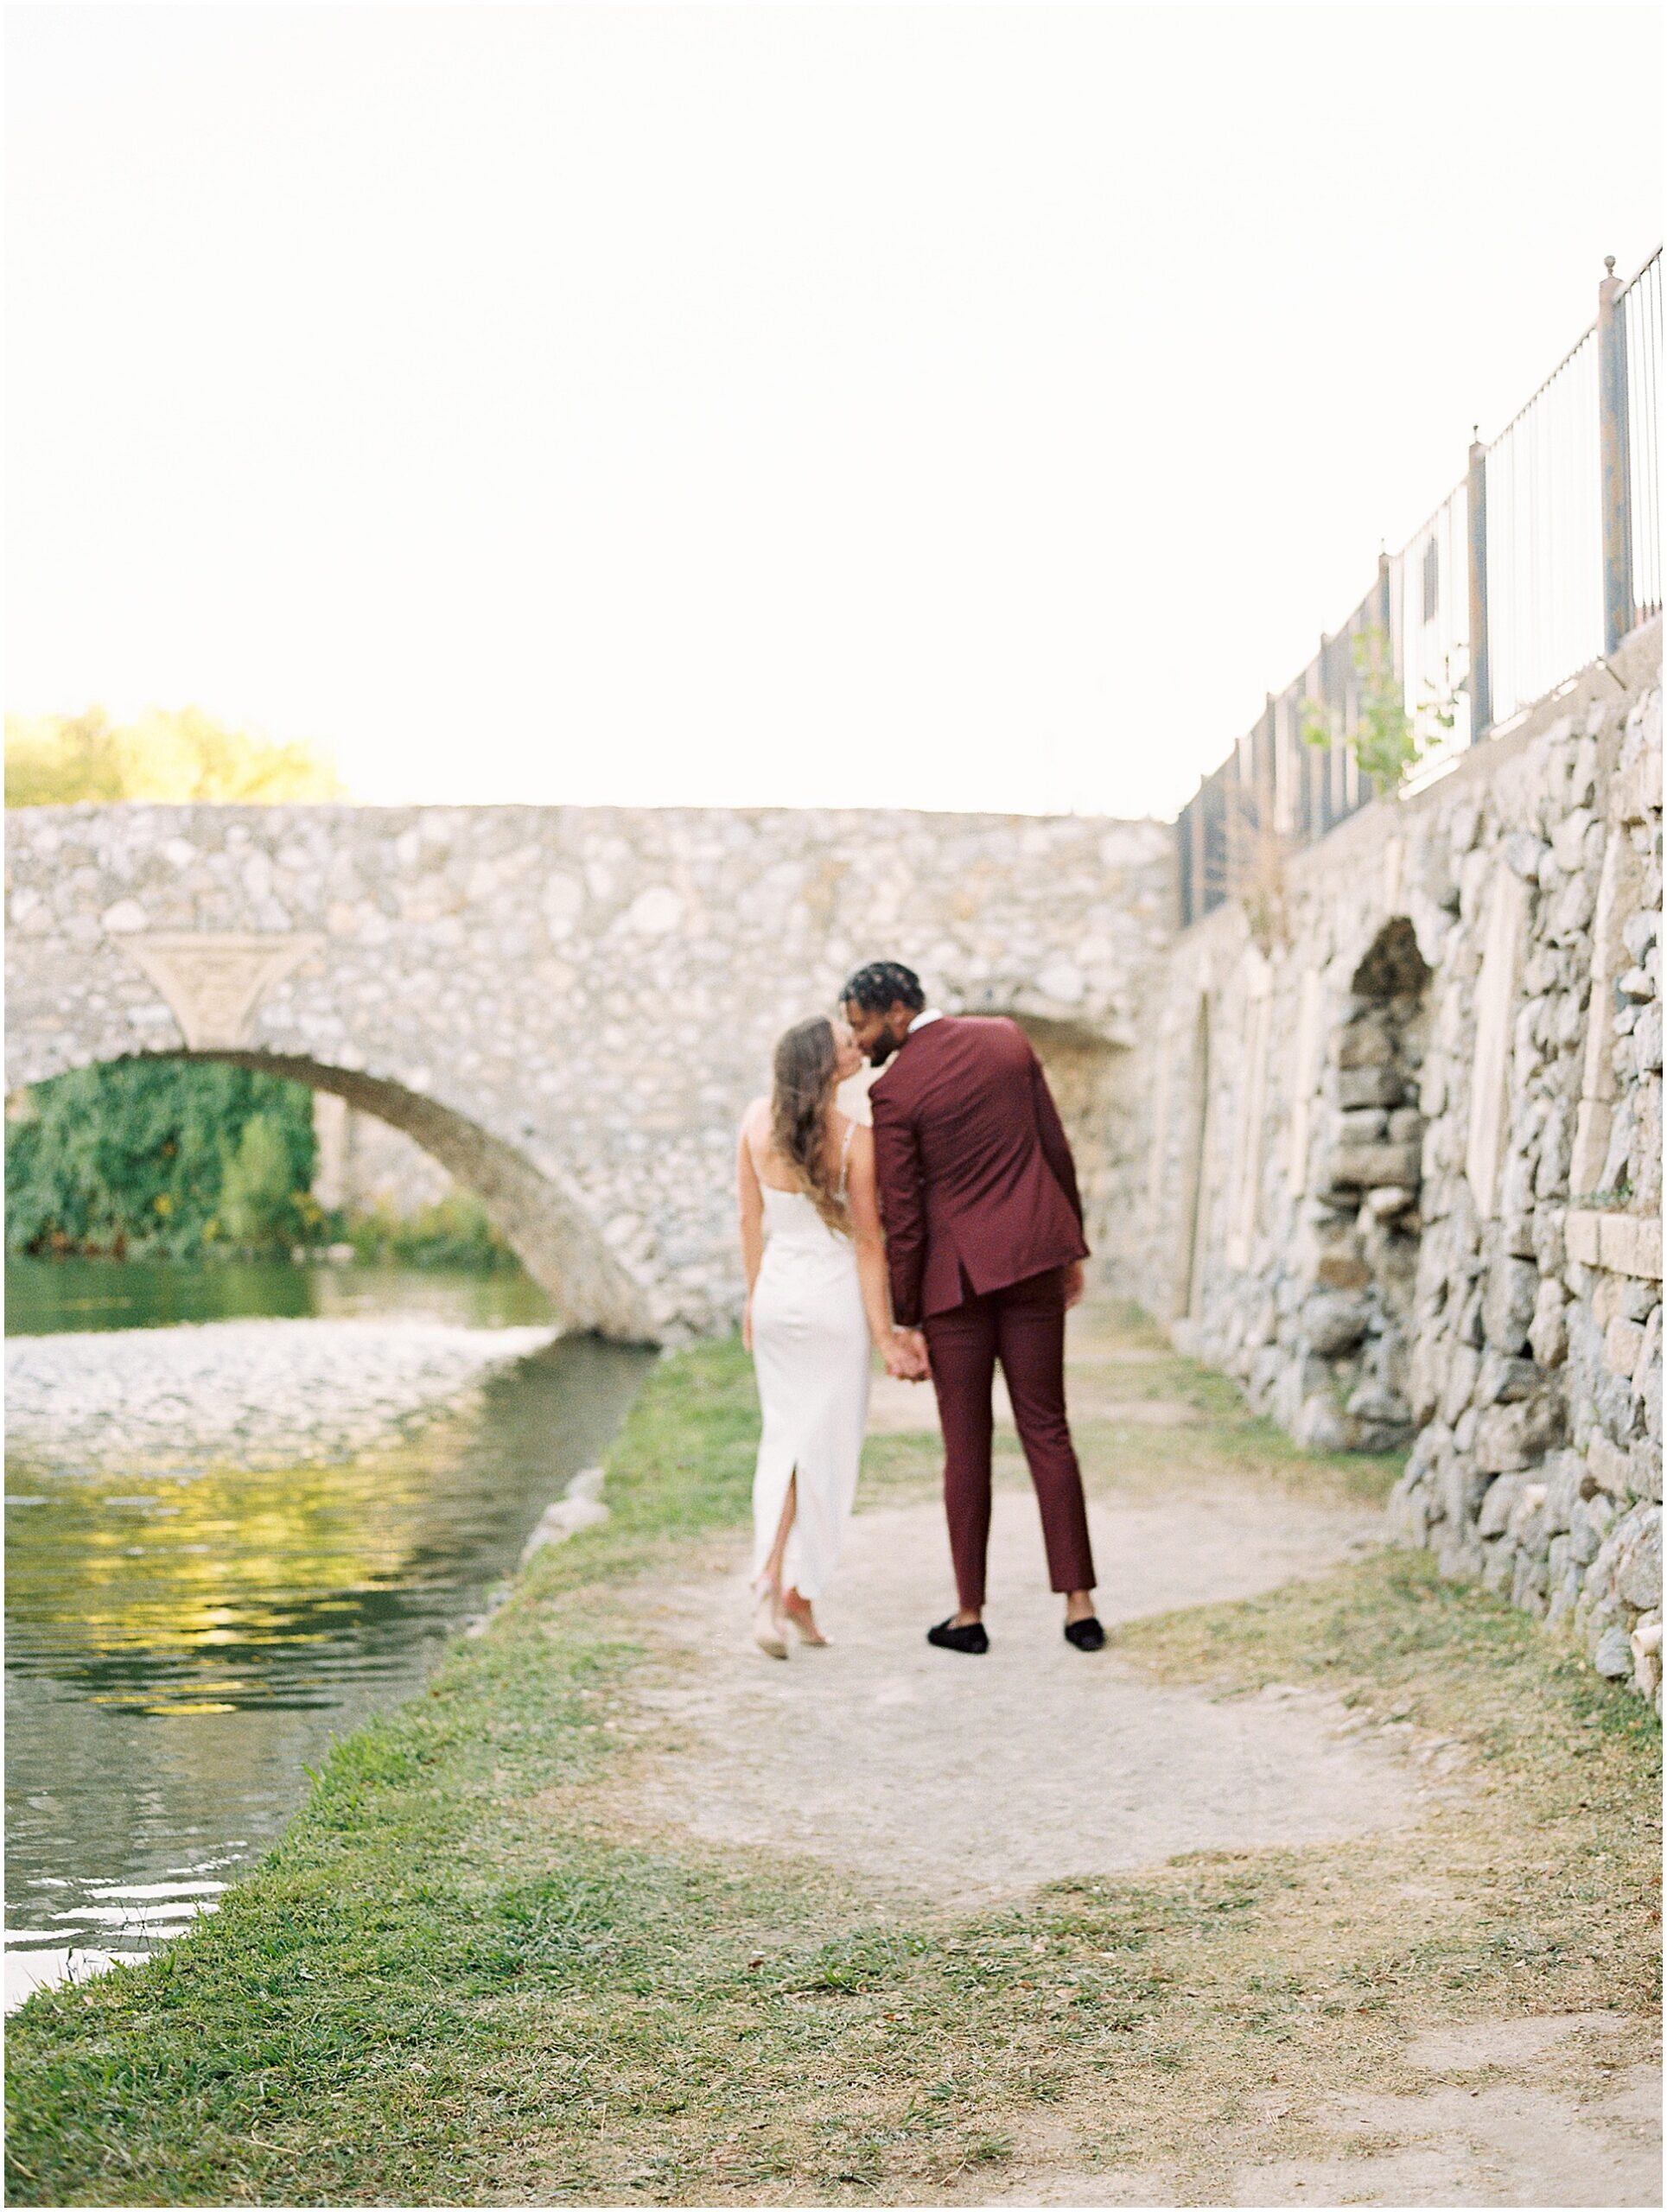 Stylish and Chic couple kissing at adriatica village.